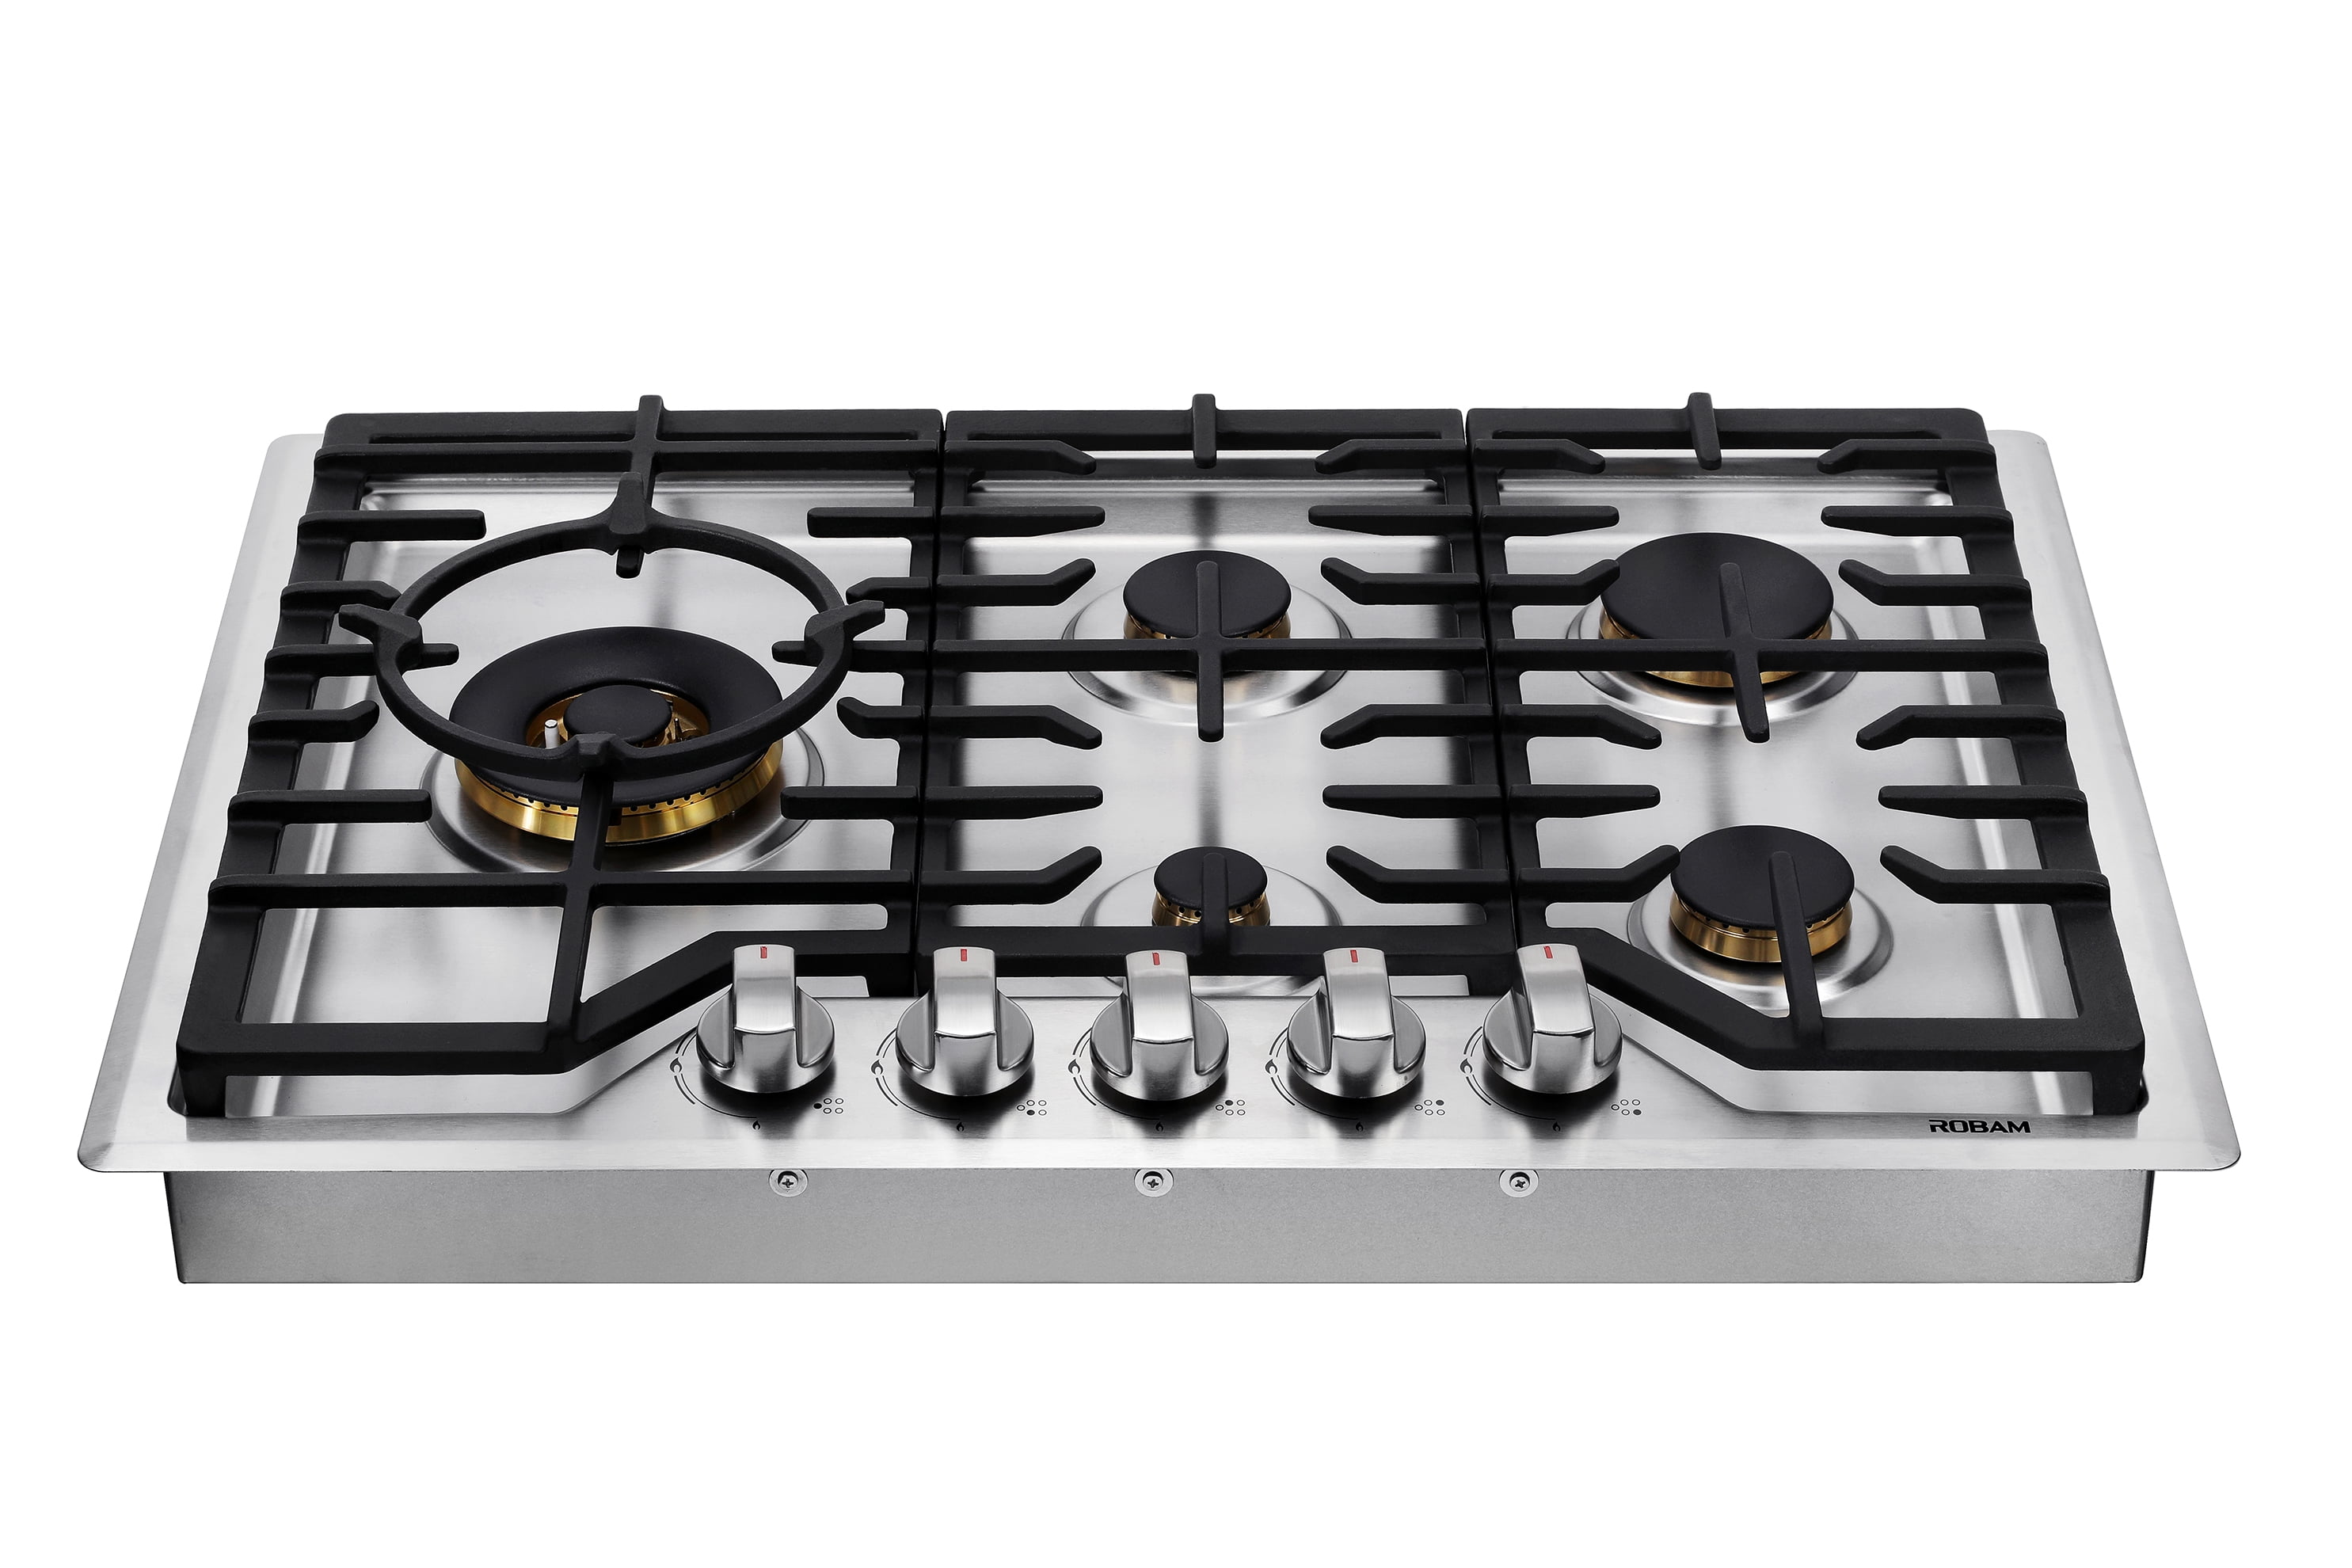 Gasland Chef 36 inch 5 Burner GAS Cooktop with Reversible Cast Iron Grill/Griddle, NG/LPG Convertible, Silver